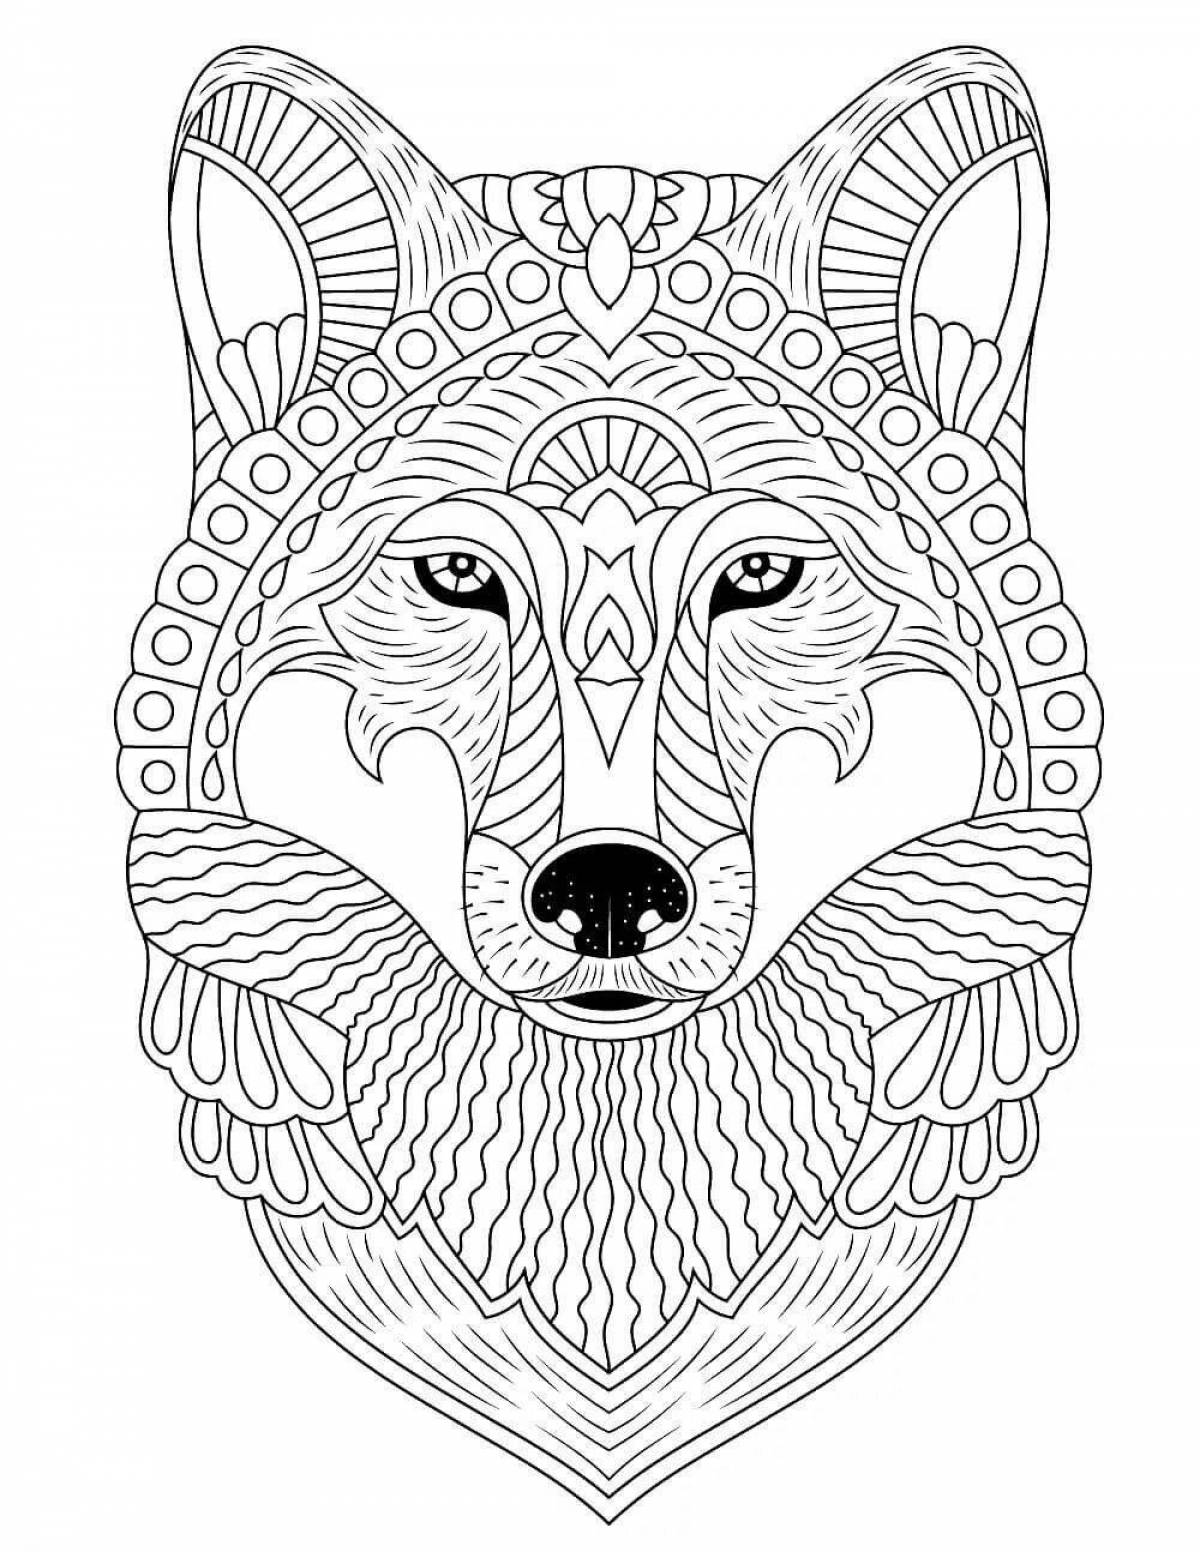 Exalted wolf coloring page